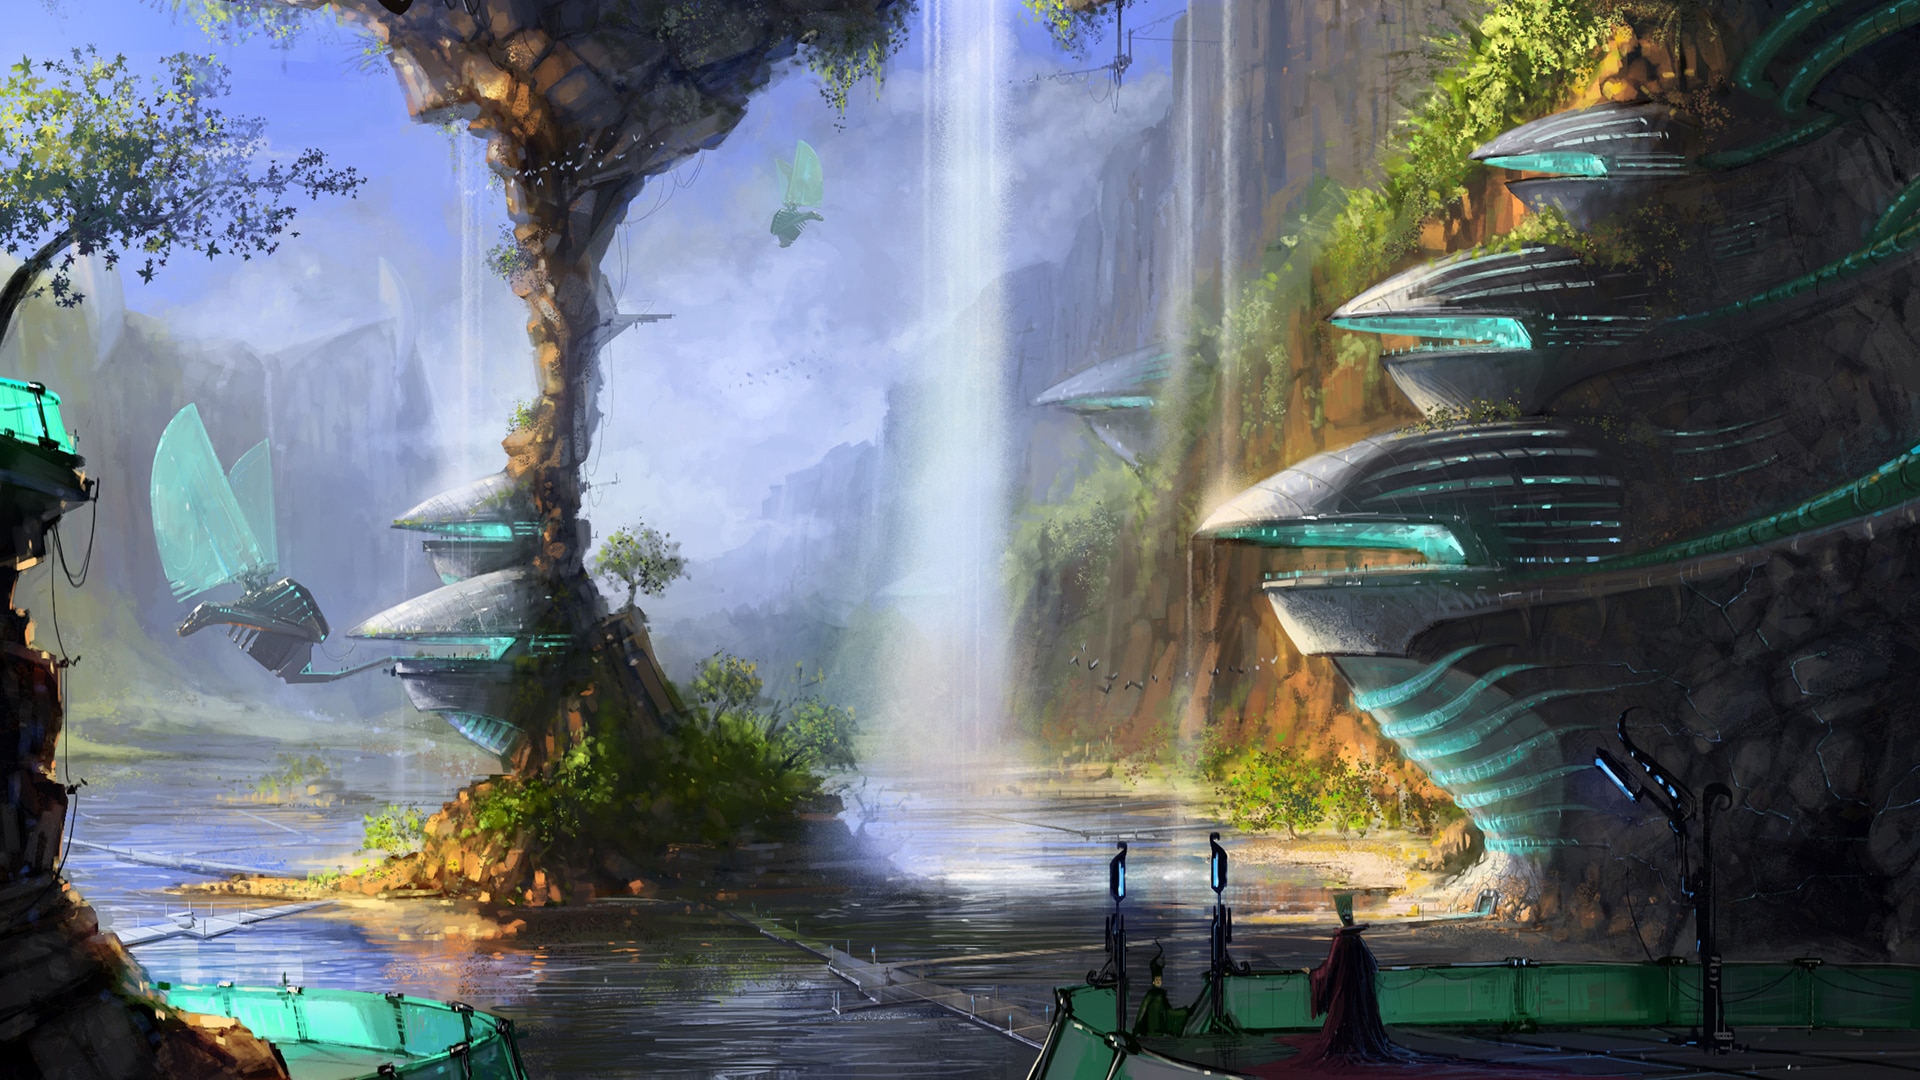 Looking for solarpunk city art for wallpaper background of my